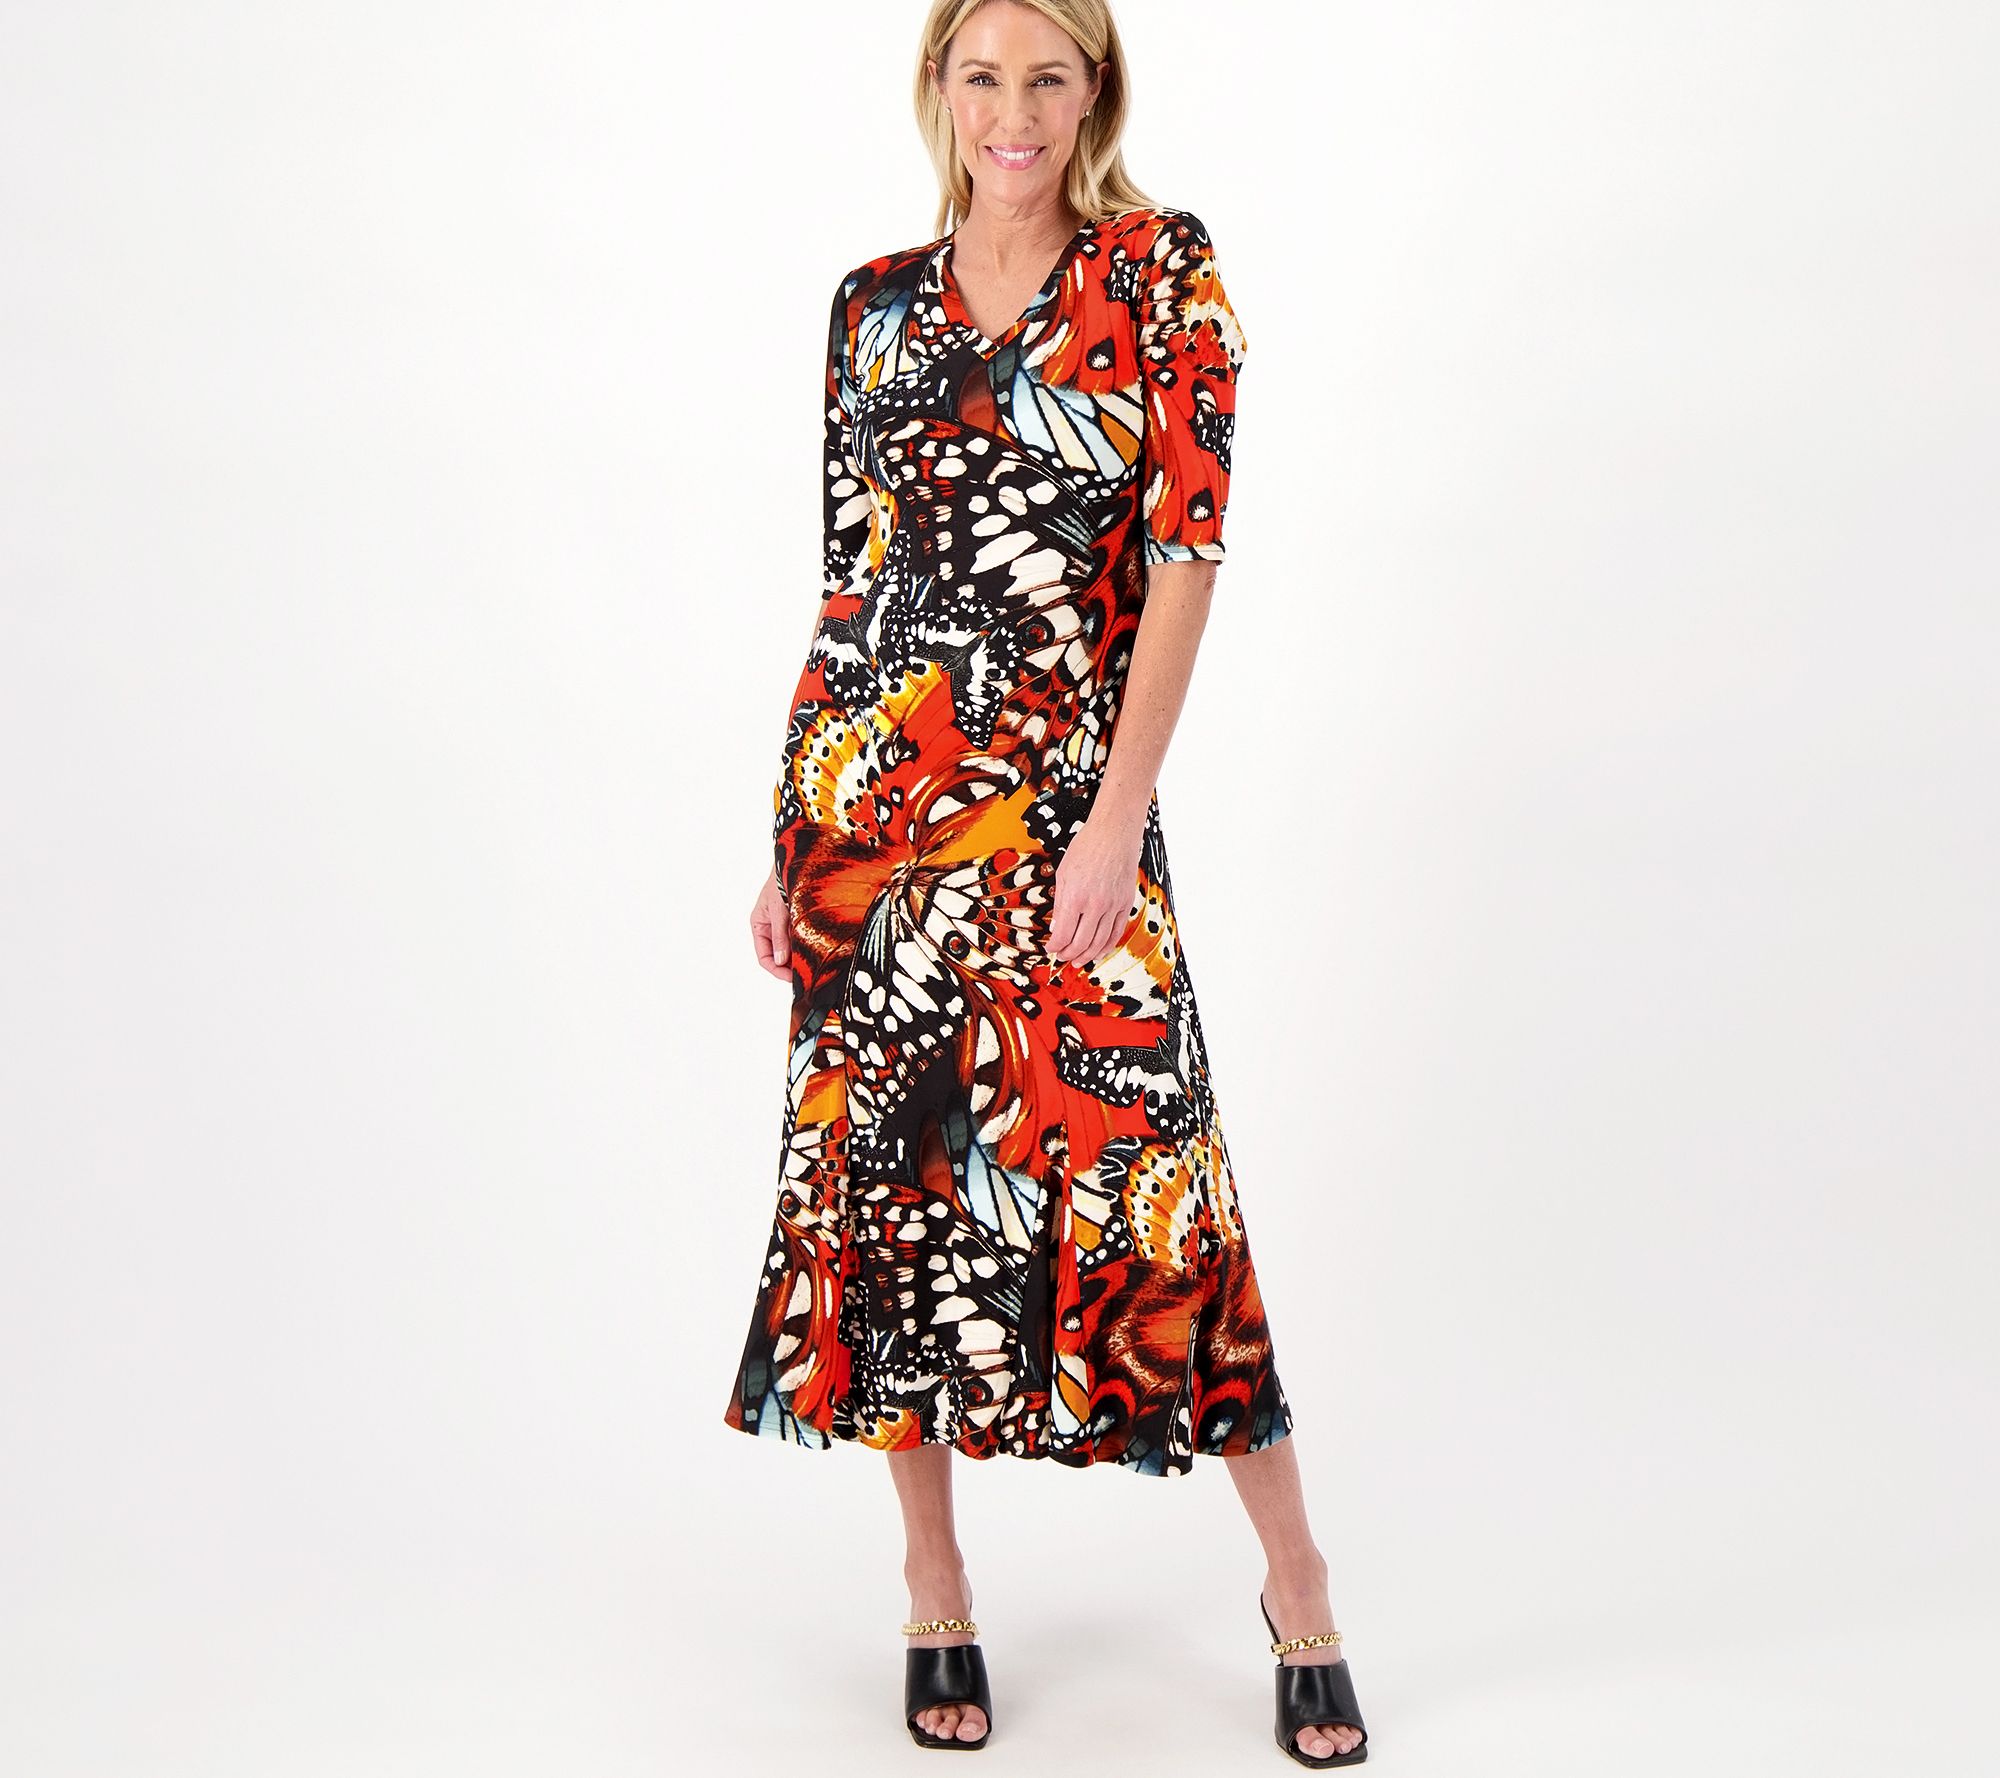 Bold vs. Subtle Prints: Which Printed Midi Dress is Right for You?